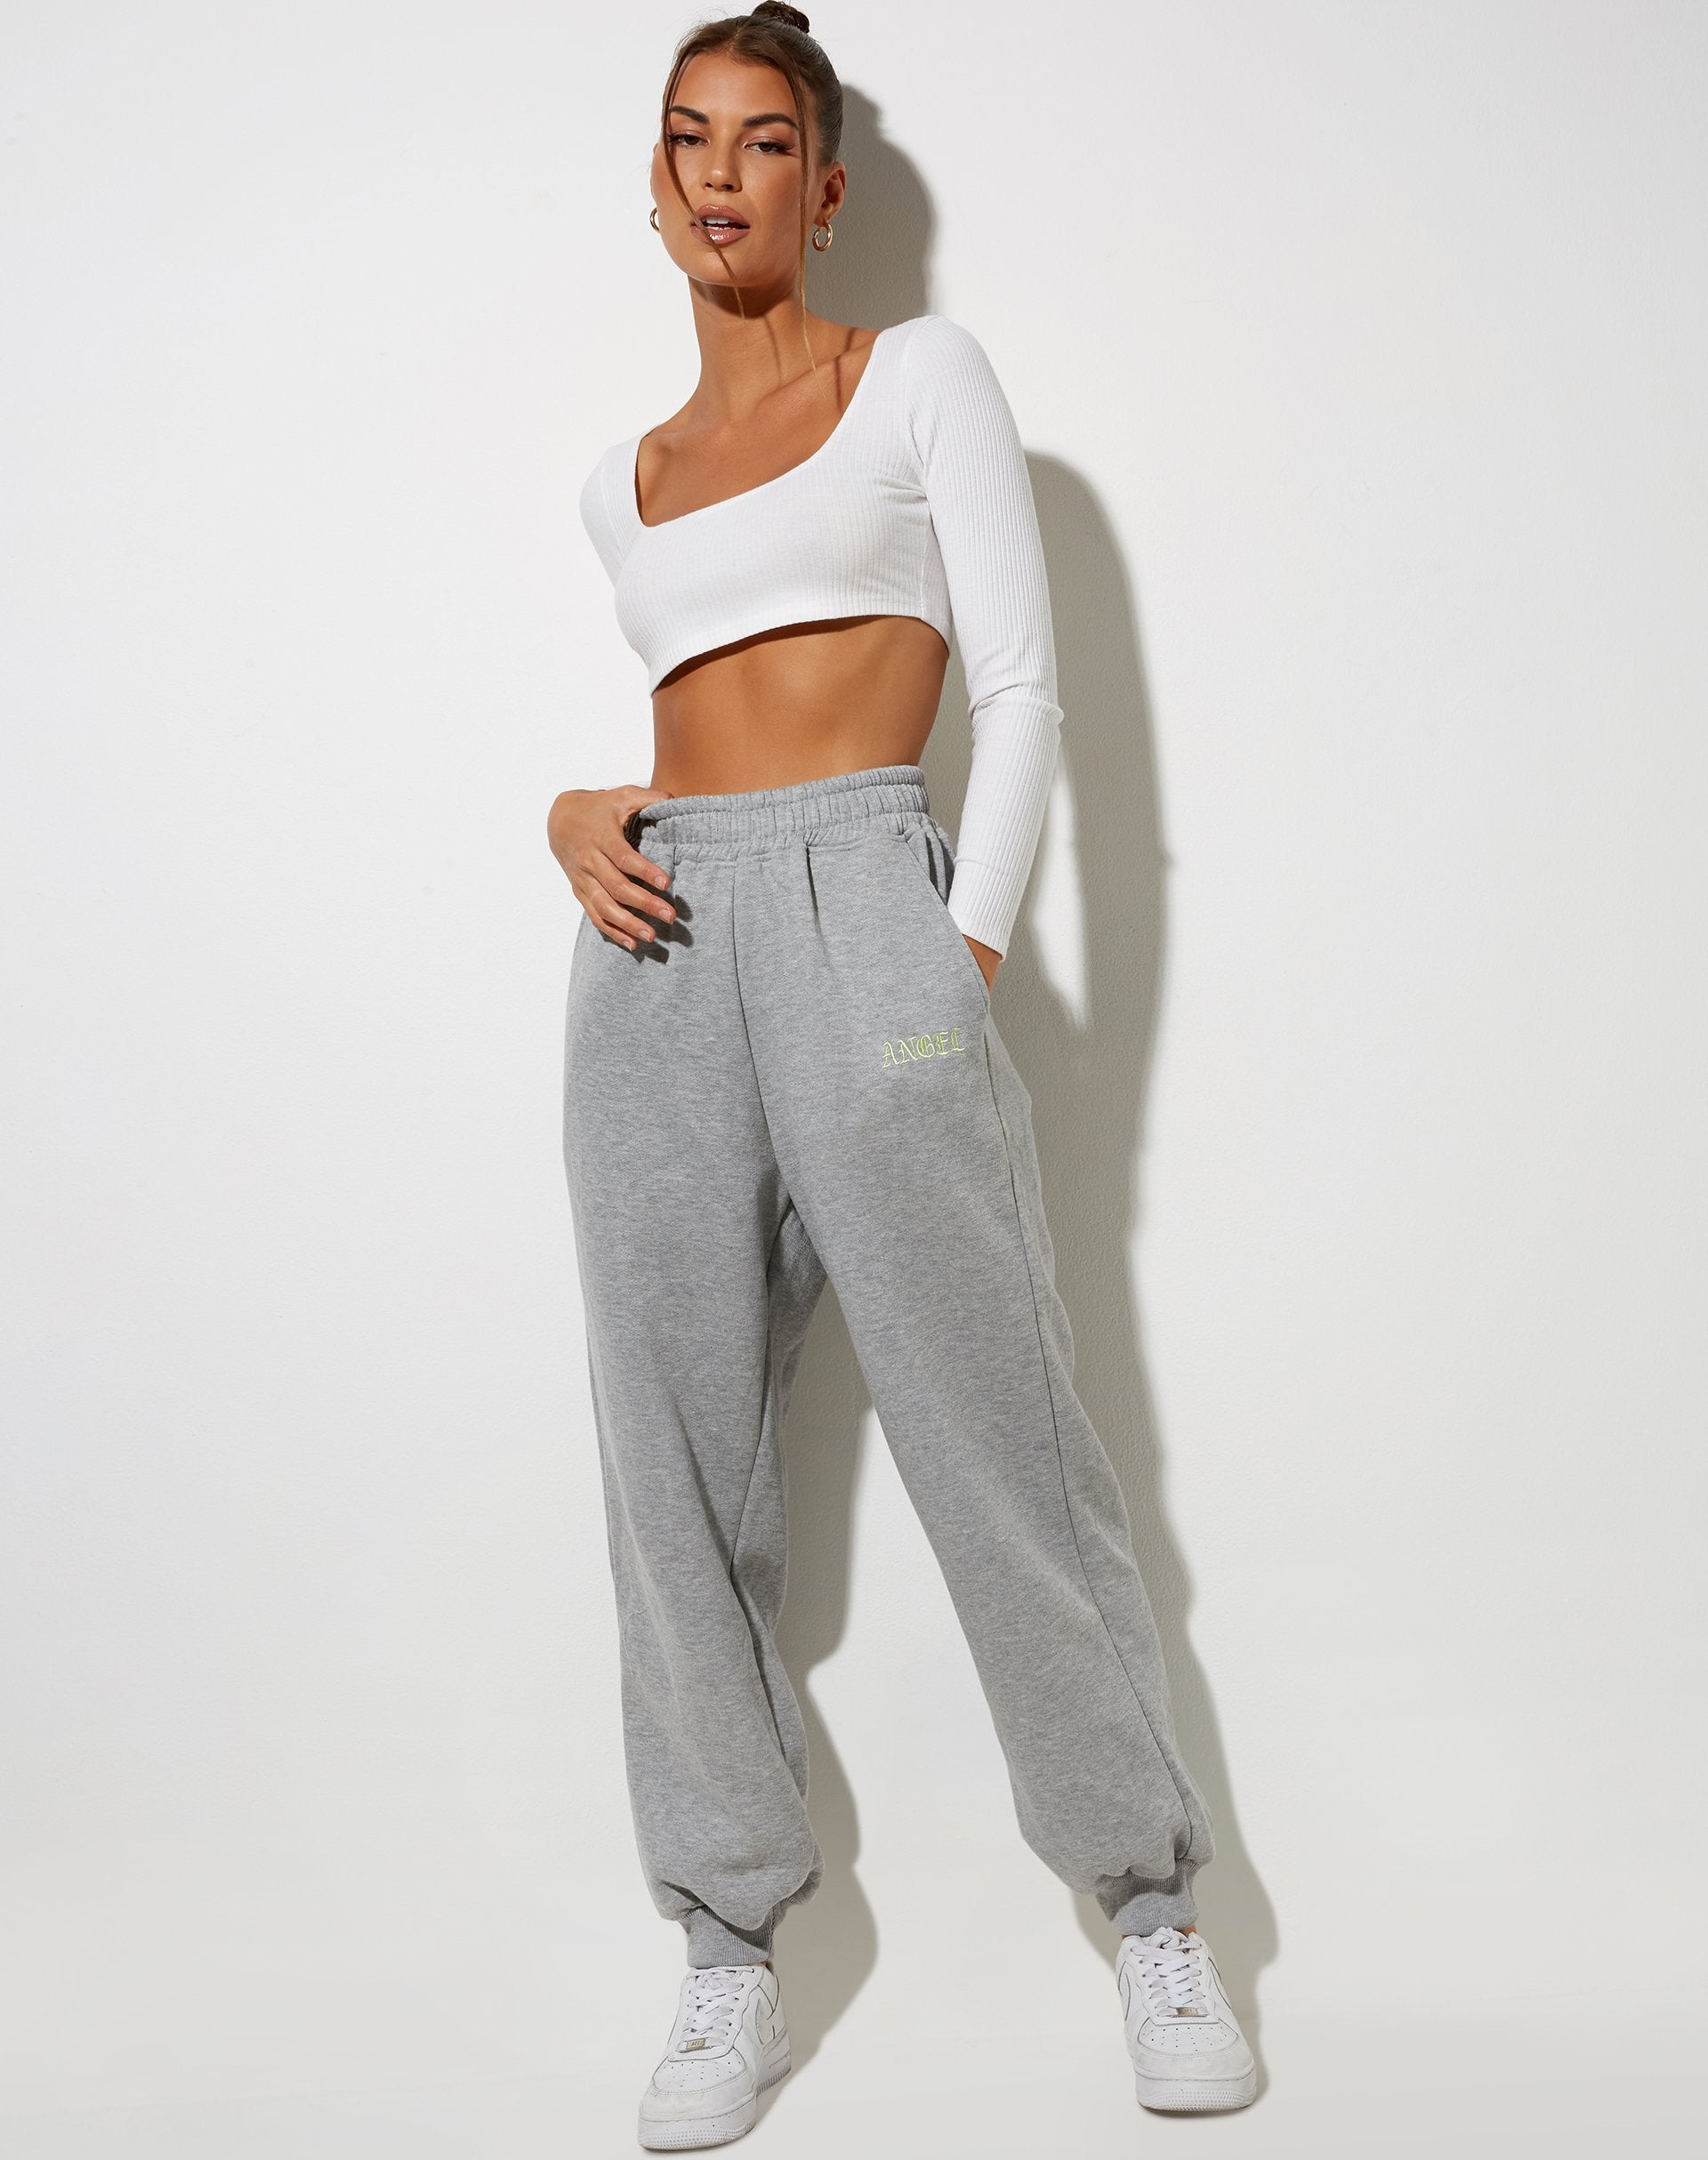 Image of Roider Jogger in Greymarl with Angel Embro in Lemon